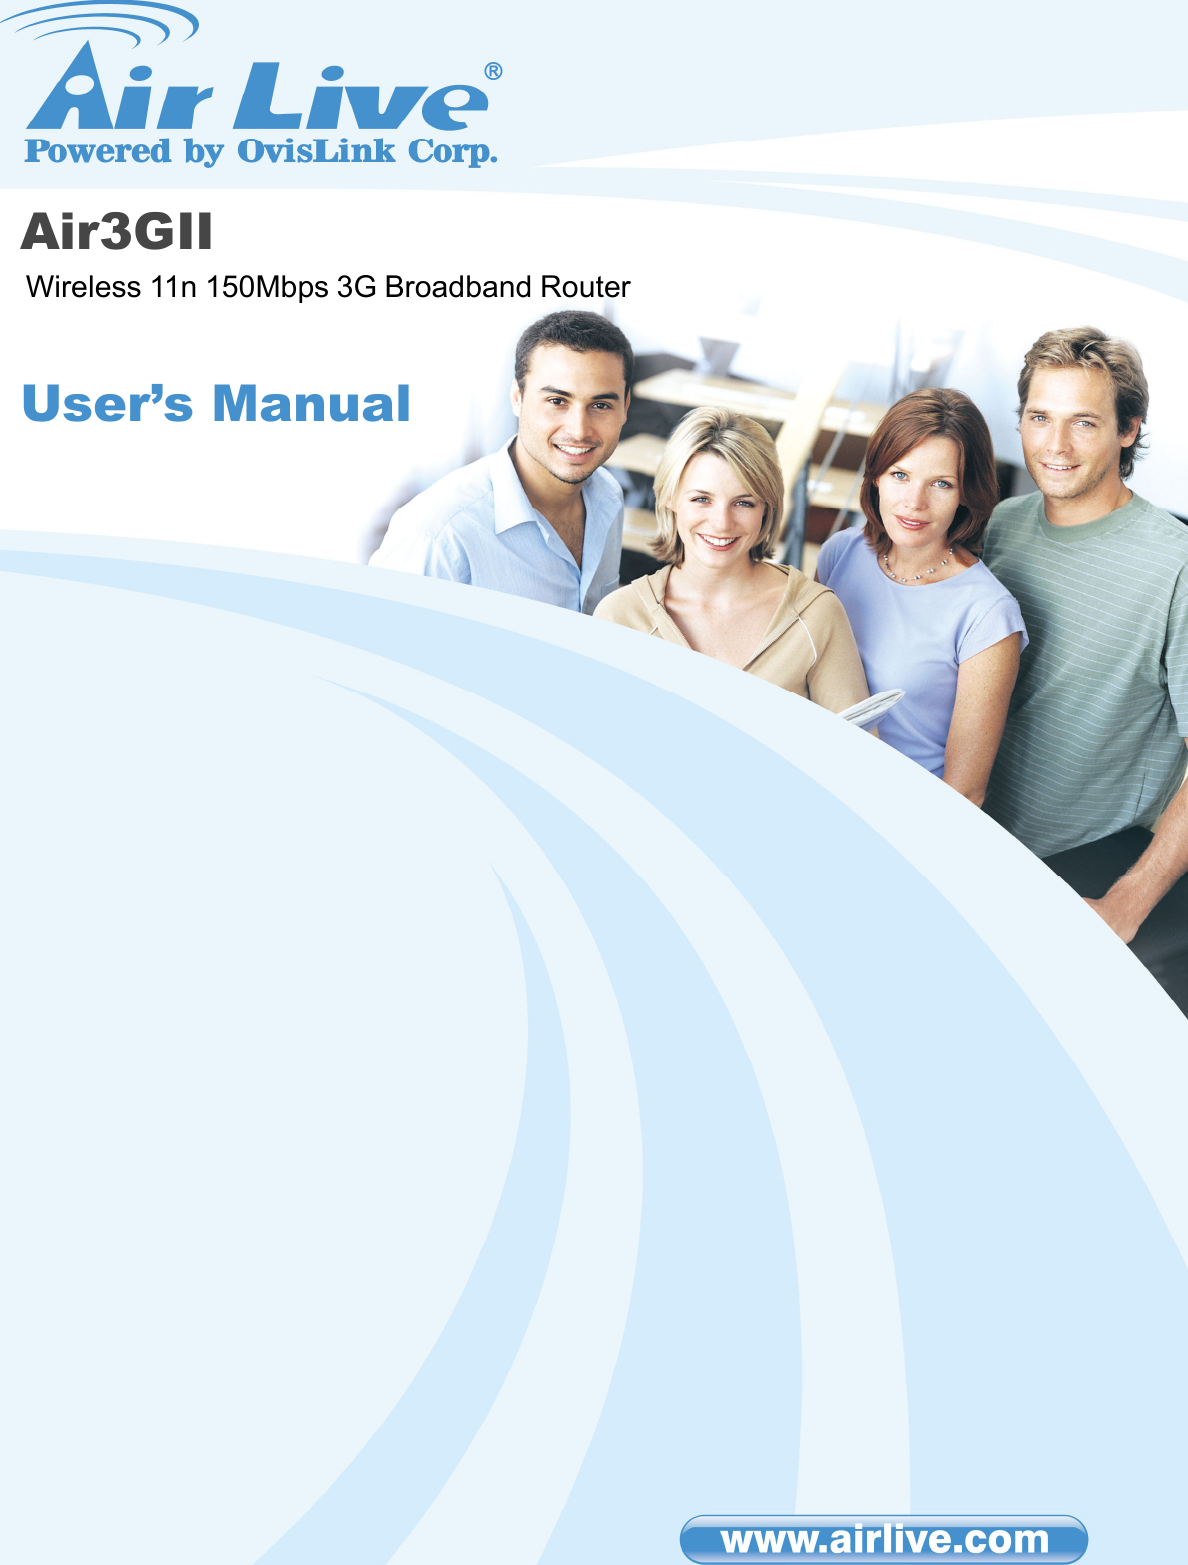 Copyright and Disclaimer       AirLive GW-300NAS User’s Manual                     Air3GII                                                                                   Wireless 11n 150Mbps 3G Broadband RouterUser’s Manual                   